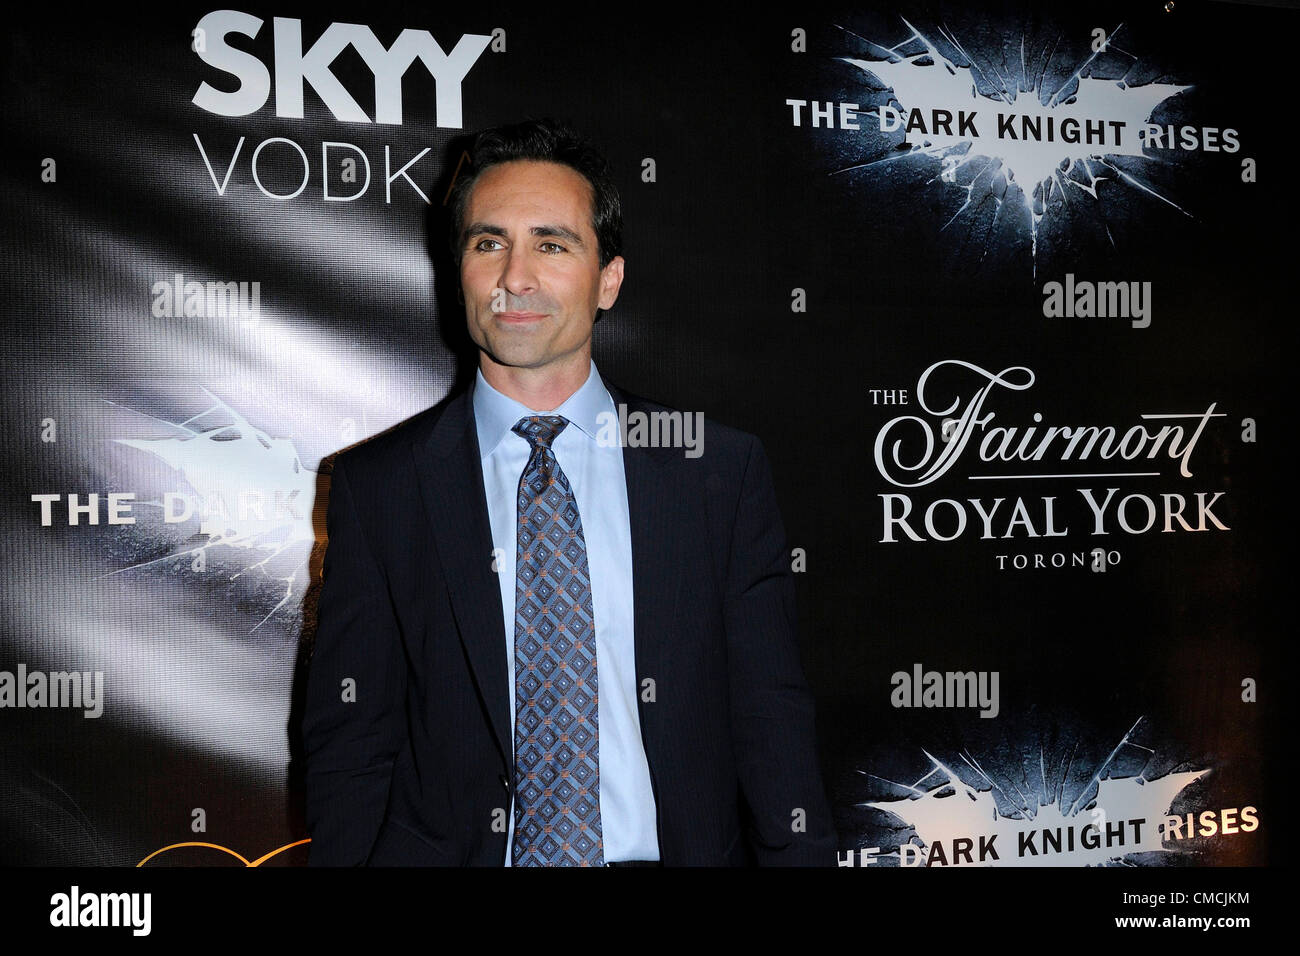 Luglio 18, 2012 - Toronto, Canada - Nestor Carbonell assiste "The Dark Knight sorge' Canadian Premiere a un King West Hotel. (DCP/N8N) Foto Stock